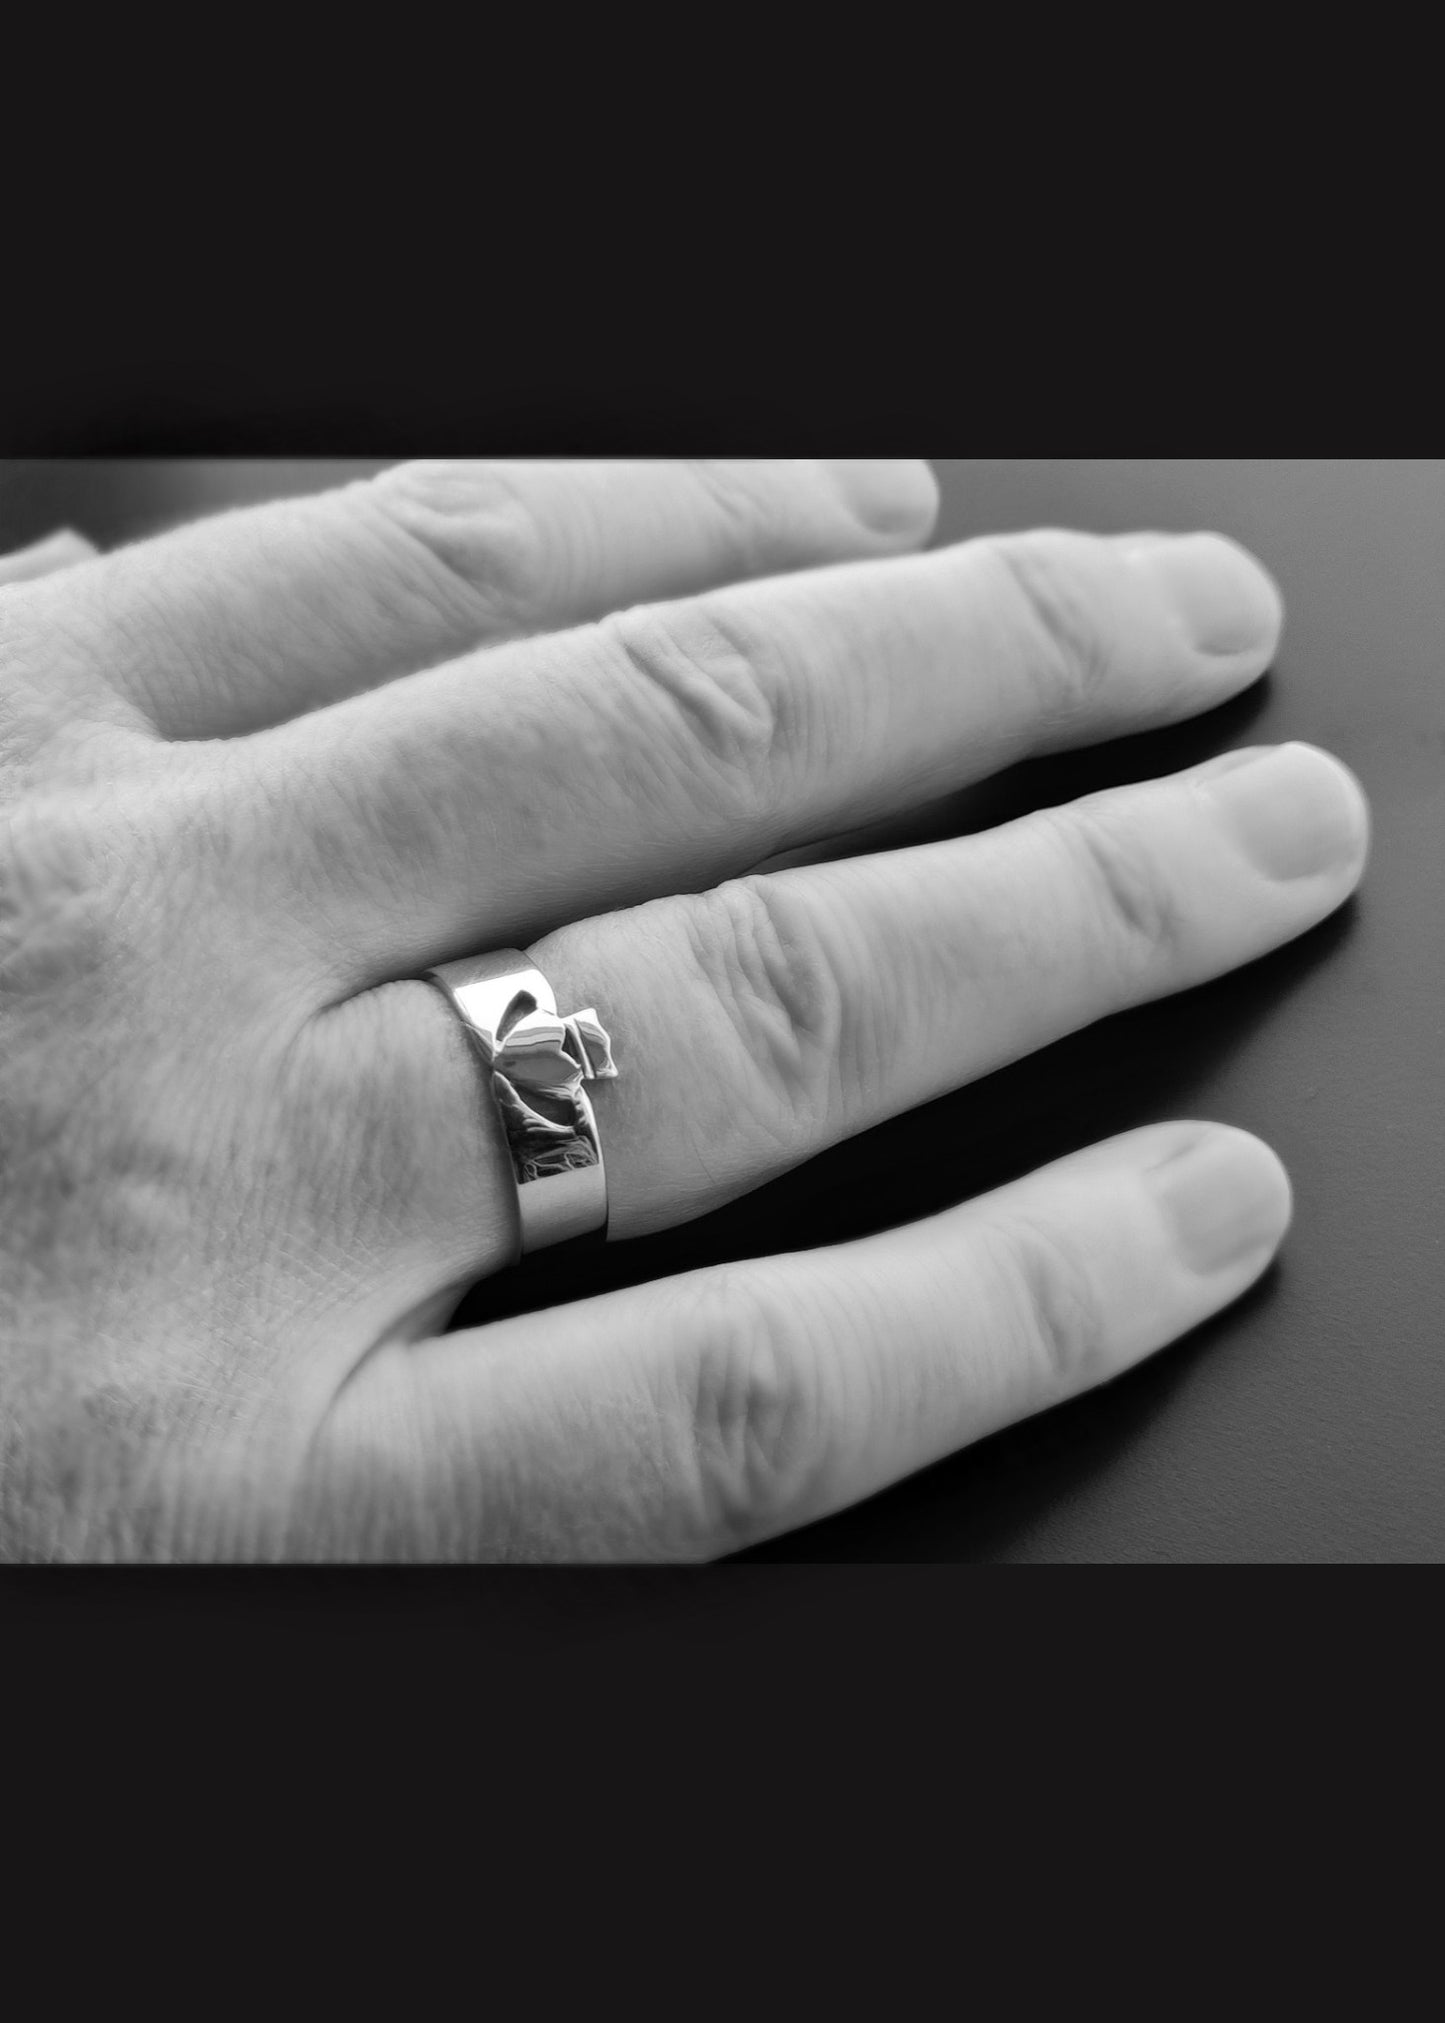 This image shows the modern white gold men;'s claddagh ring in a polished finish o n a man's hand